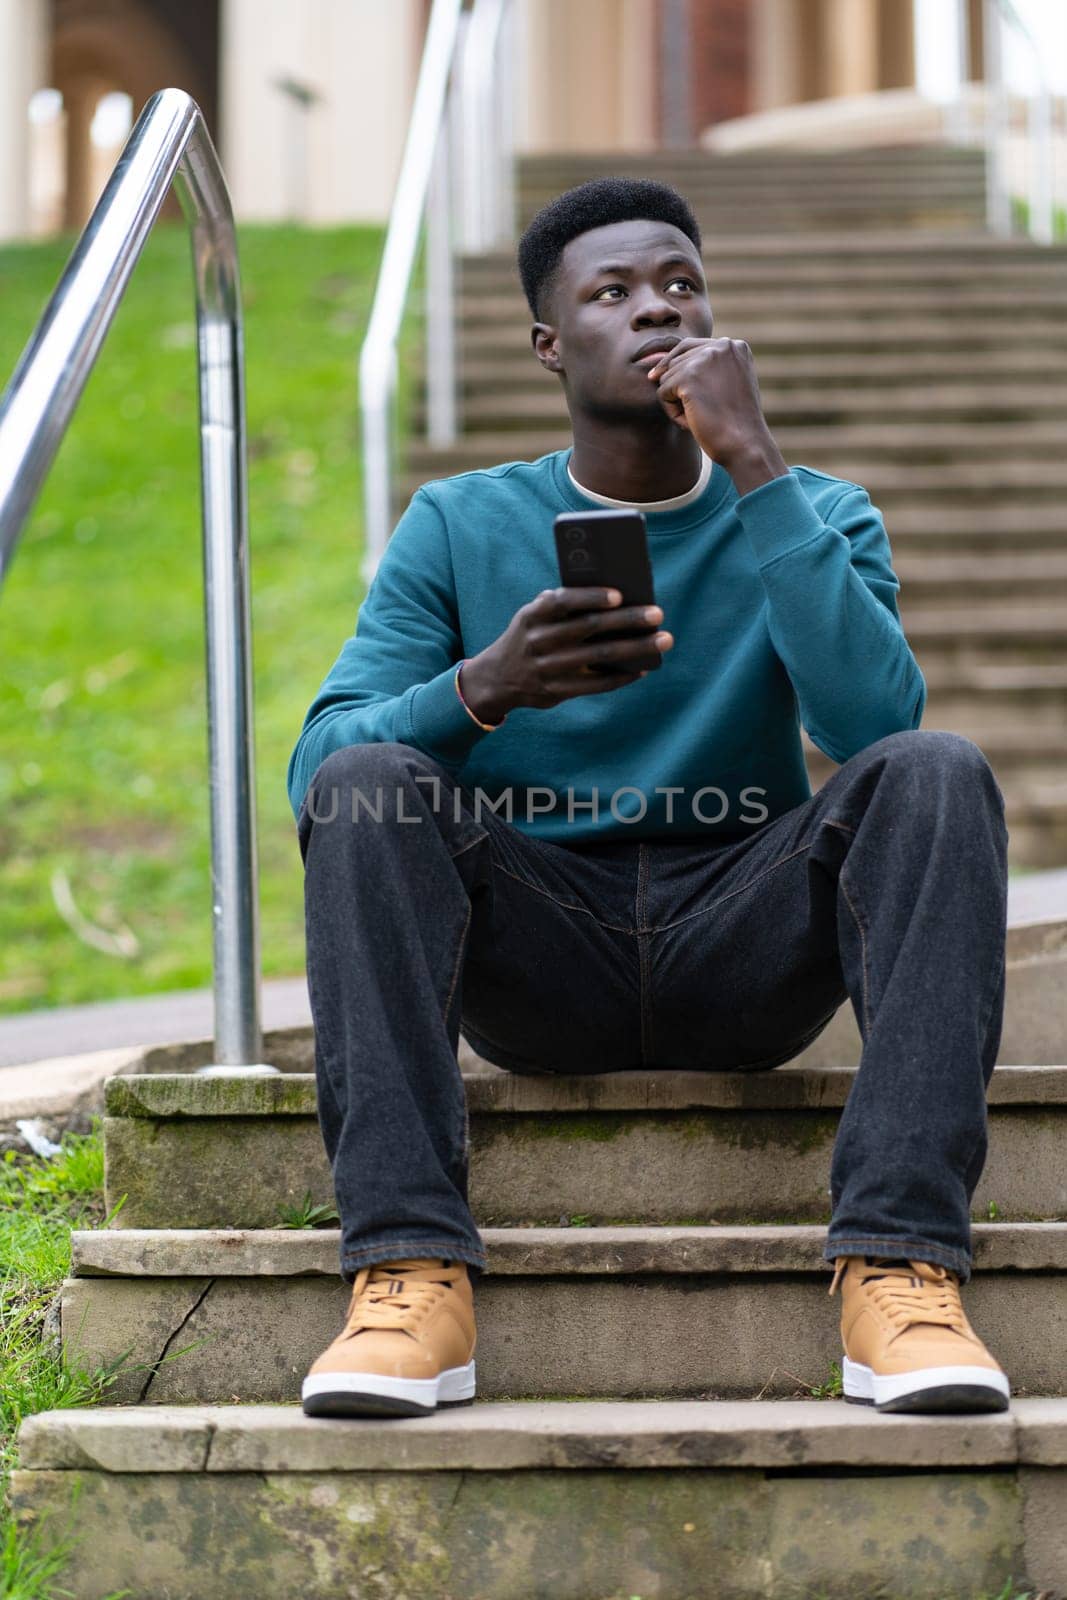 A young man sits on a set of stairs with his cell phone in his hand. He is deep in thought, possibly contemplating something important